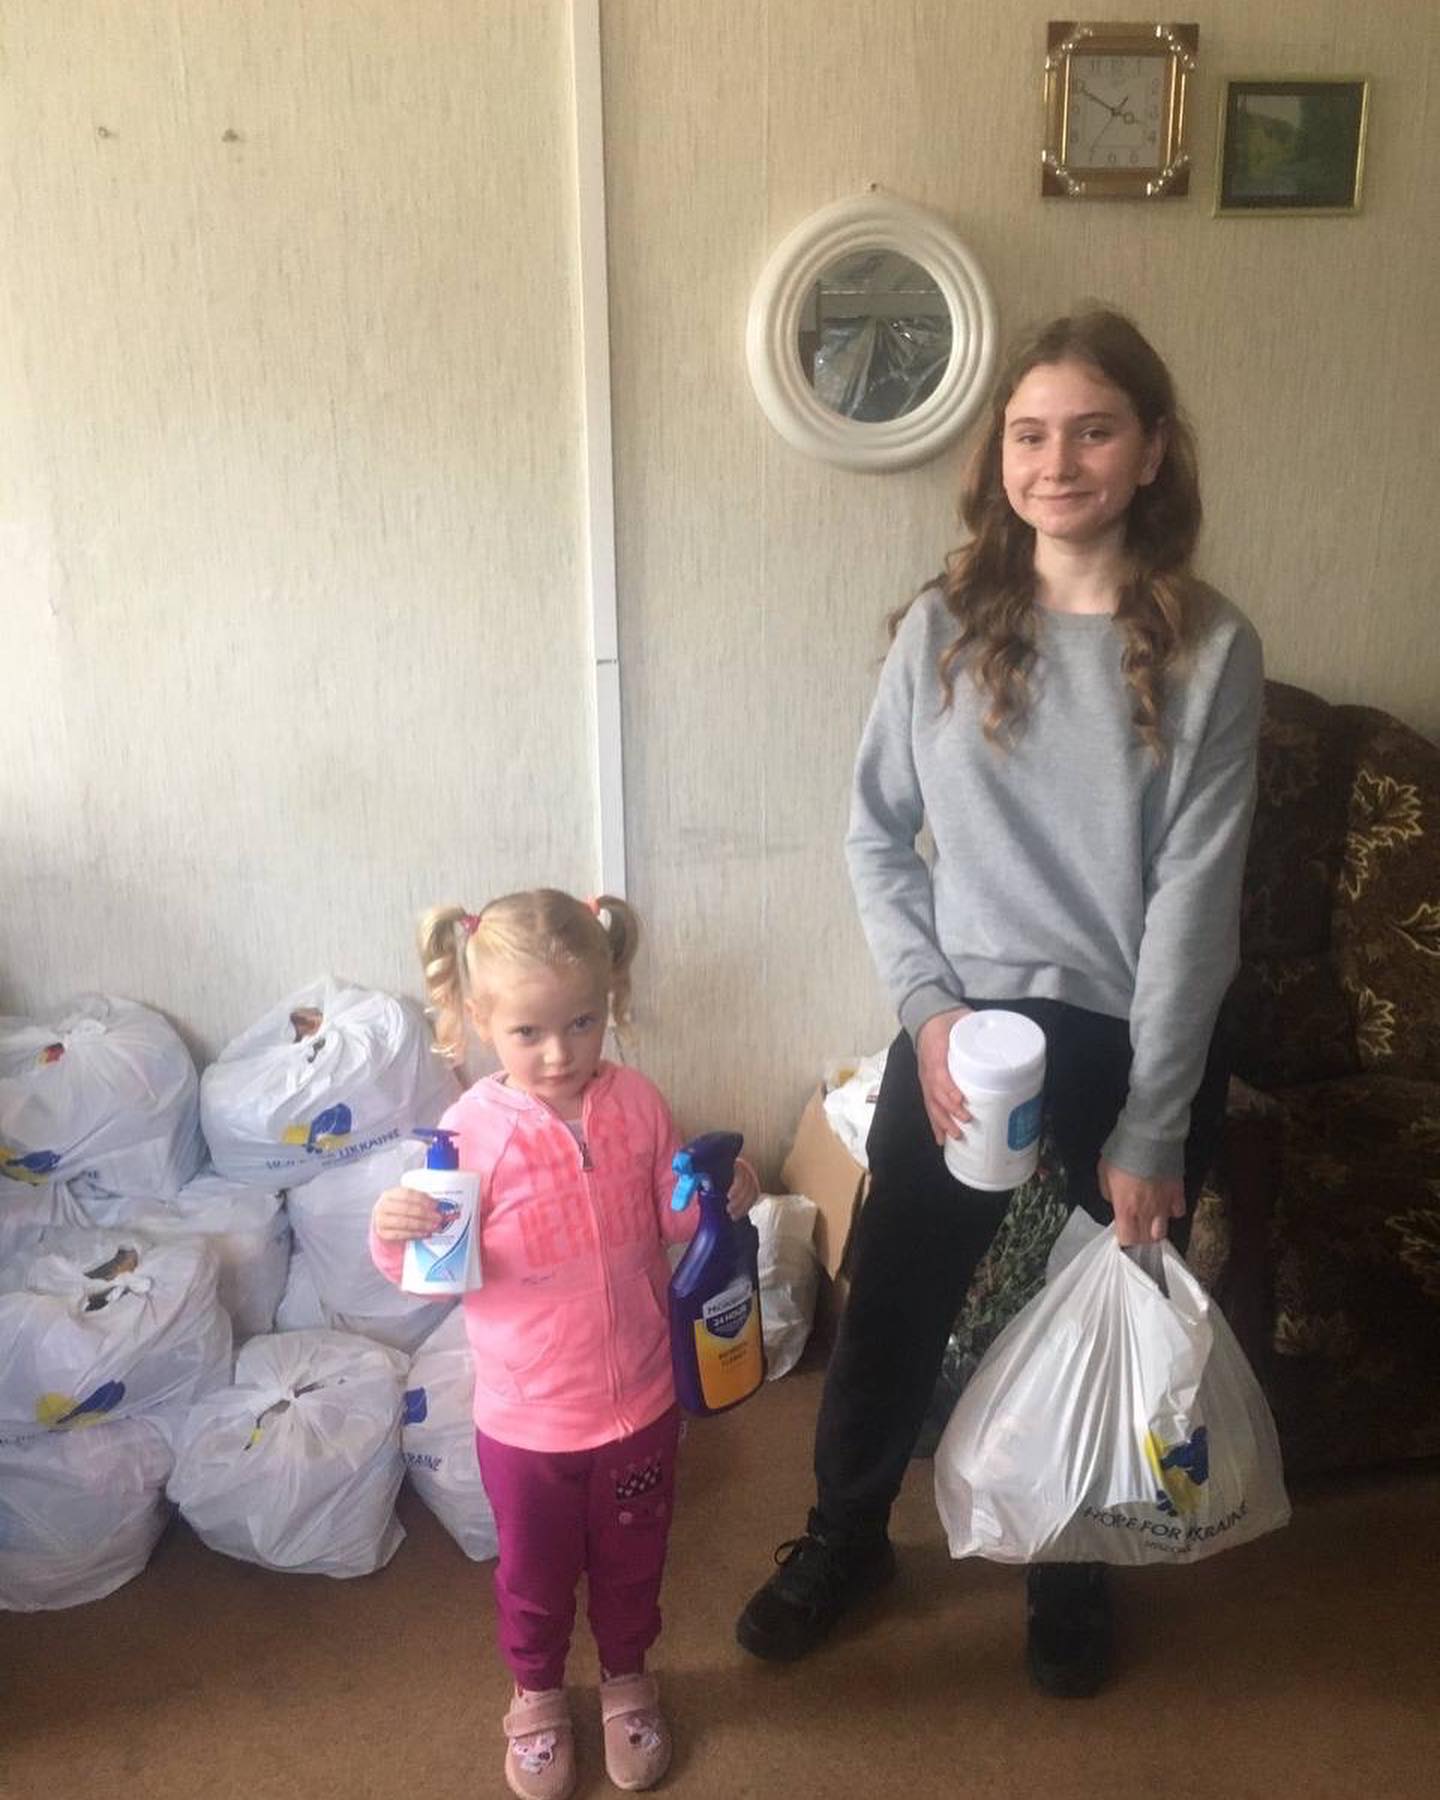 Two young girls standing in front of a room full of bags.